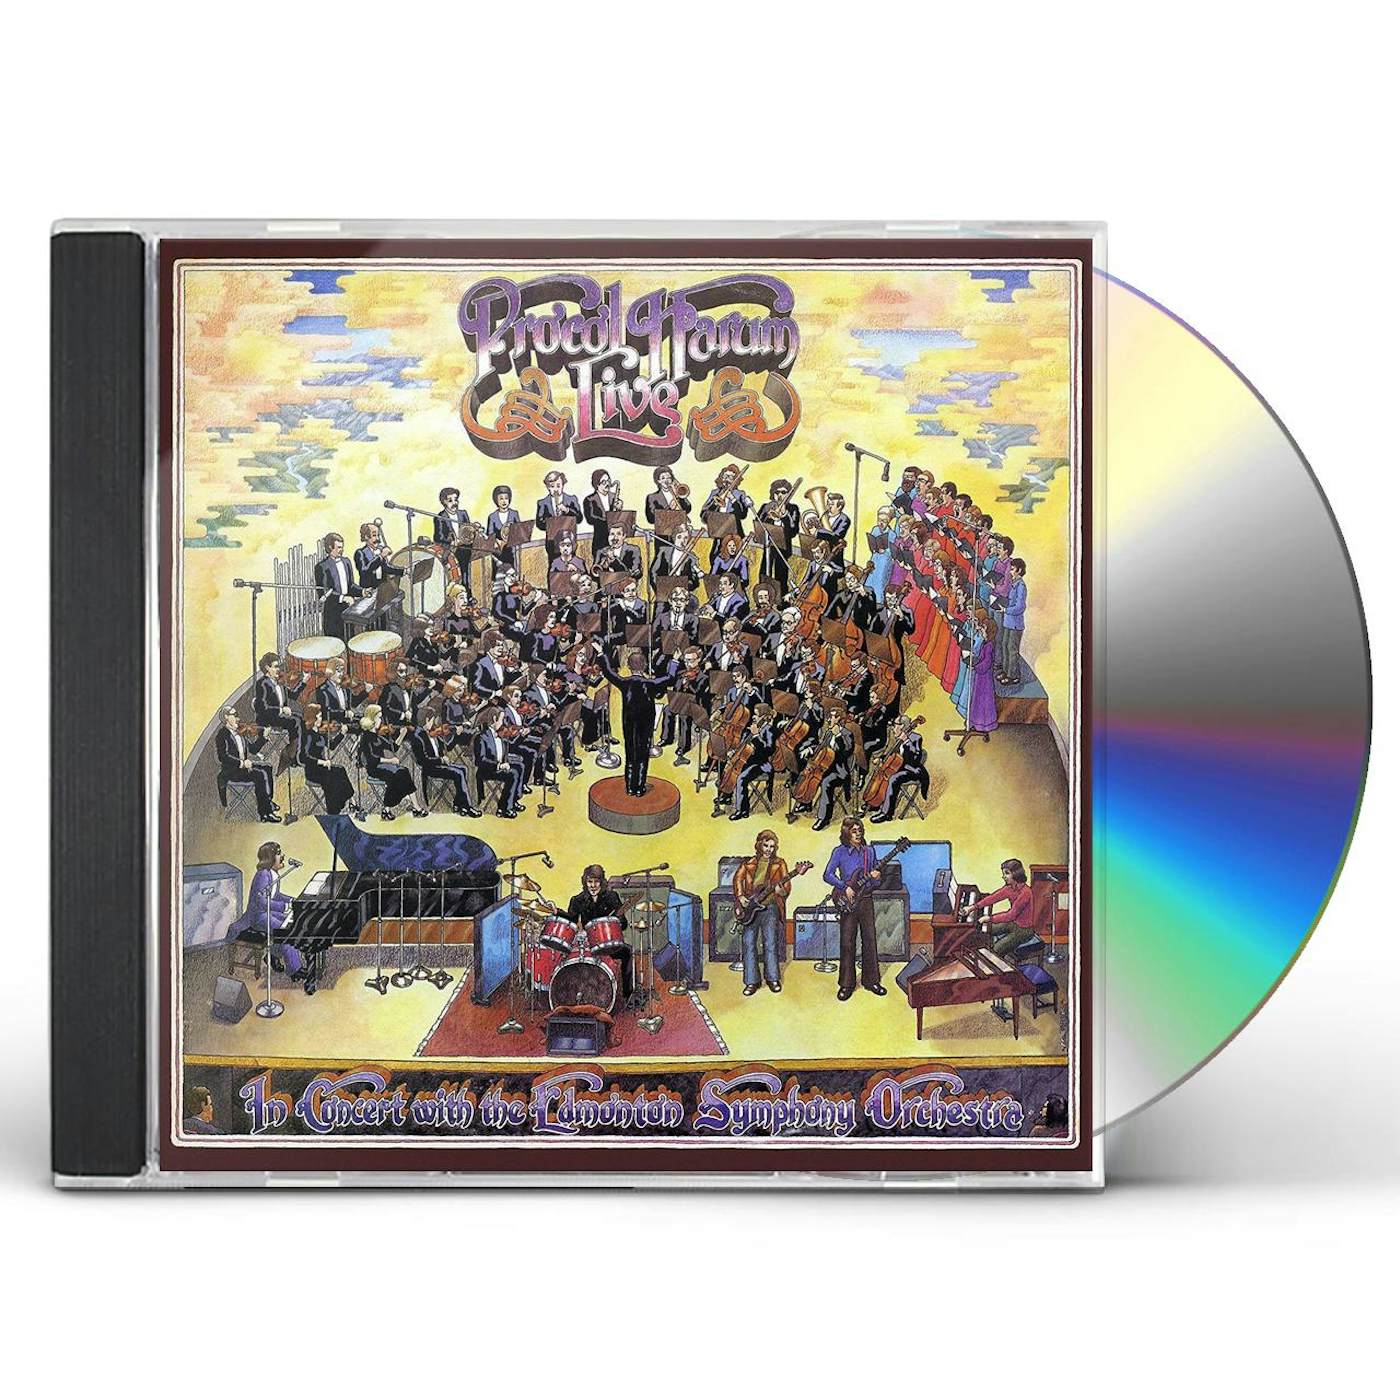 Procol Harum LIVE: IN CONCERT WITH EDMONTON SYMPHONY ORCHESTRA CD